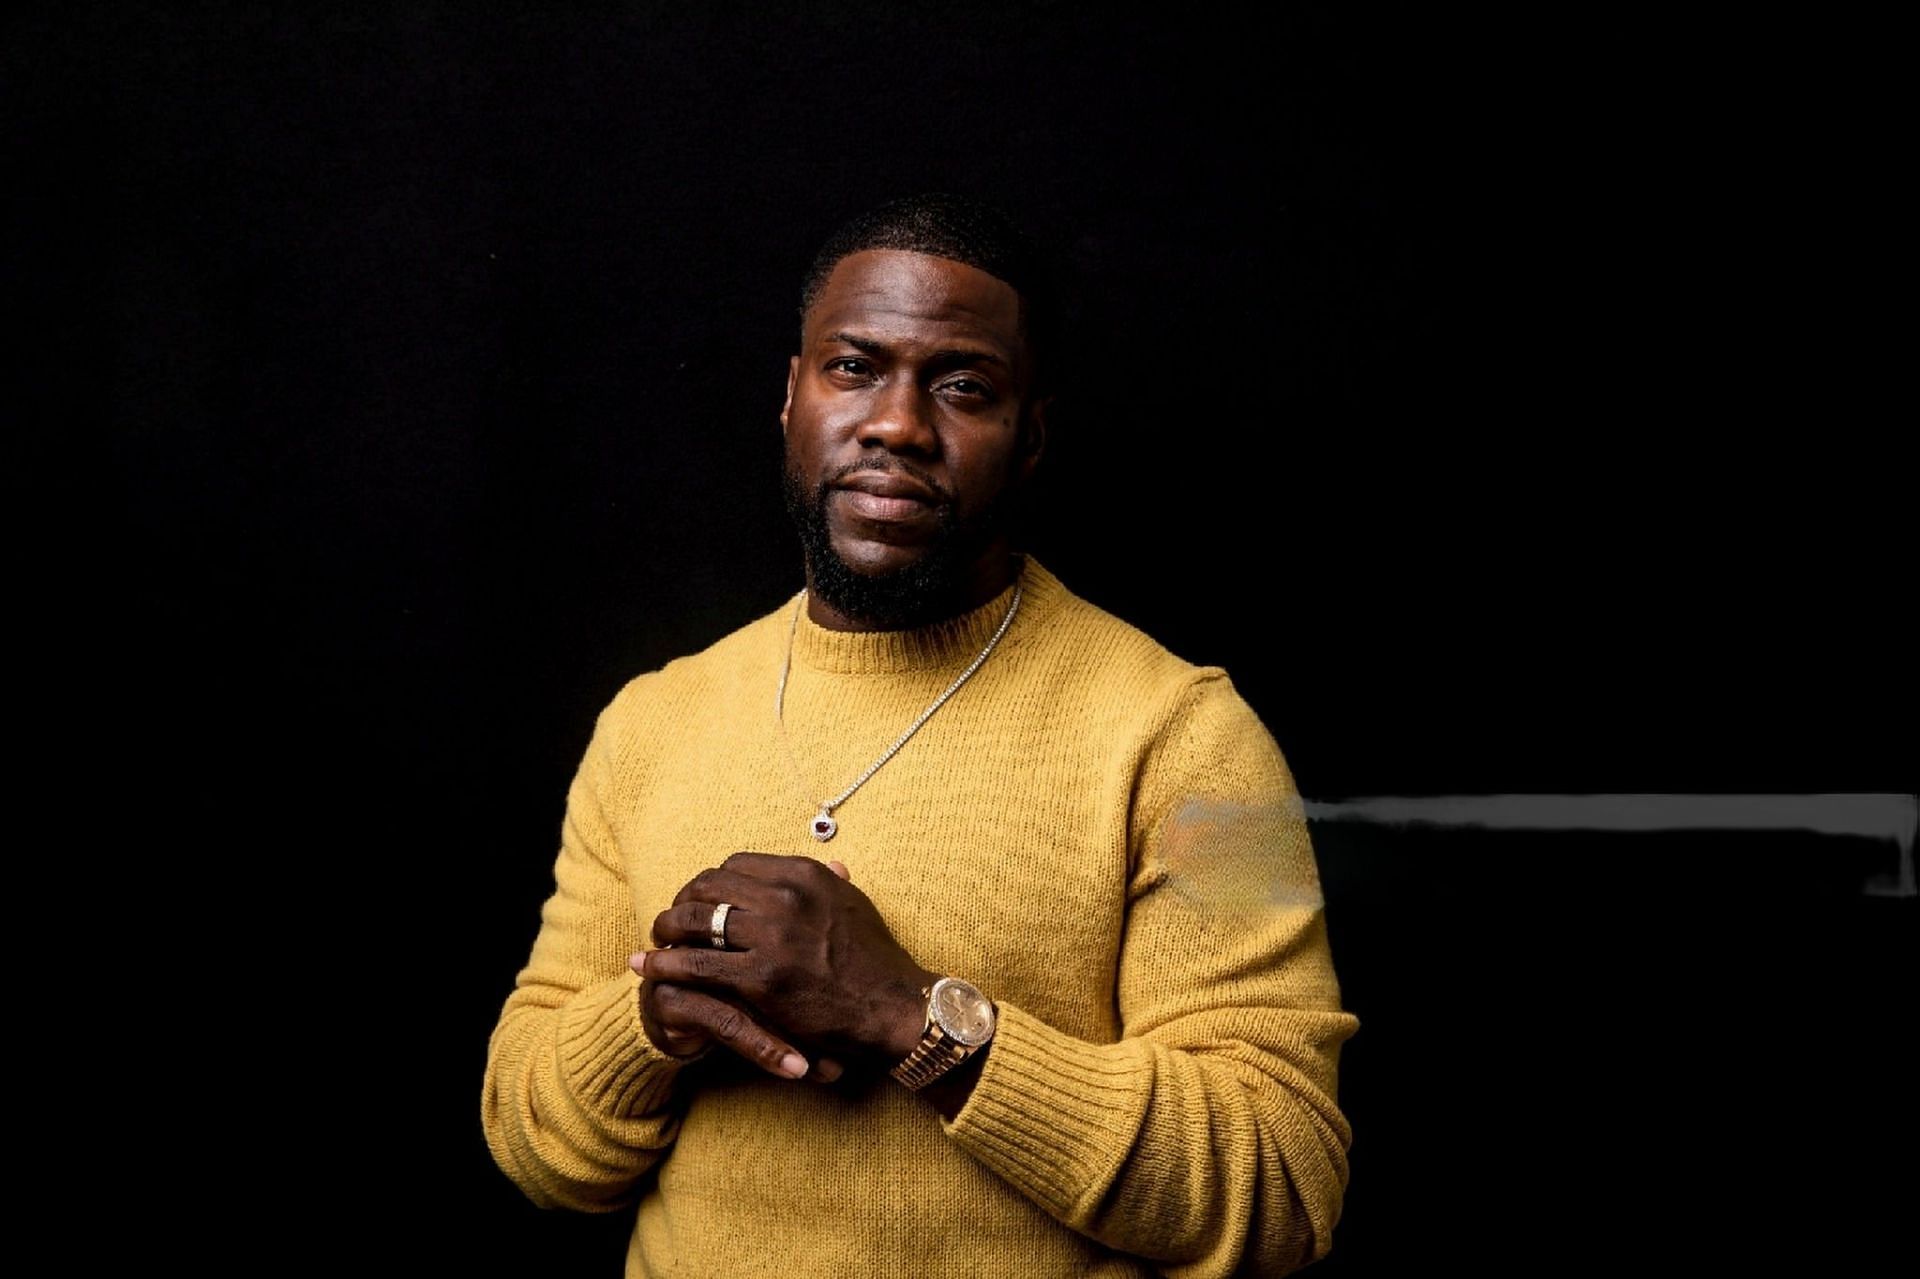 Kevin Hart at the Premier of his film The Secret Life OF Pets 2 (Image via Getty)